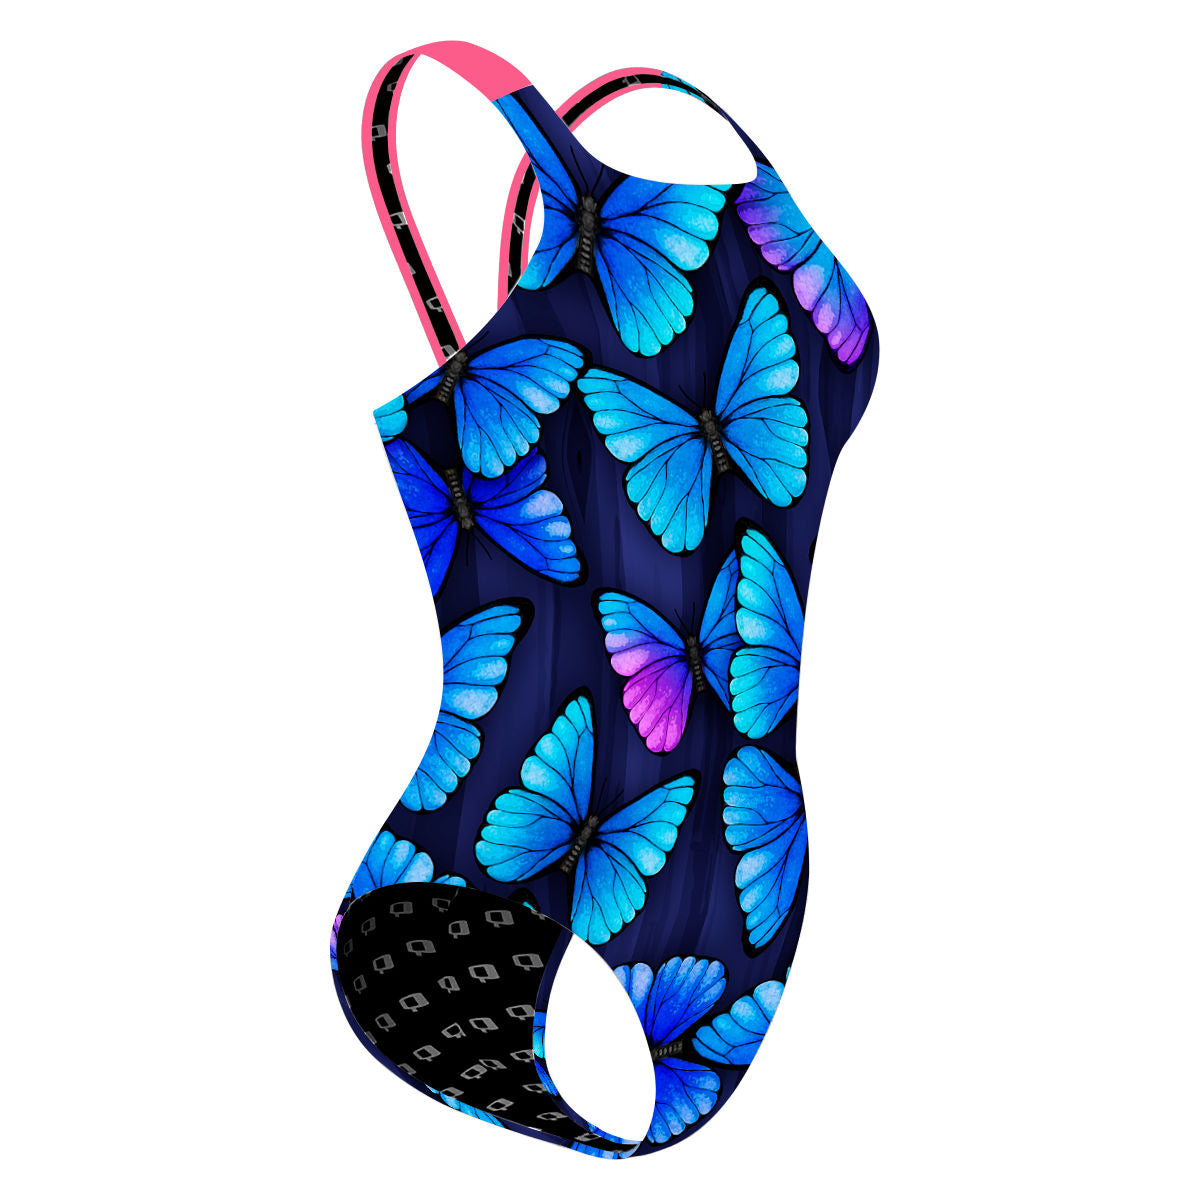 Blue Butterfly - Classic Strap Swimsuit